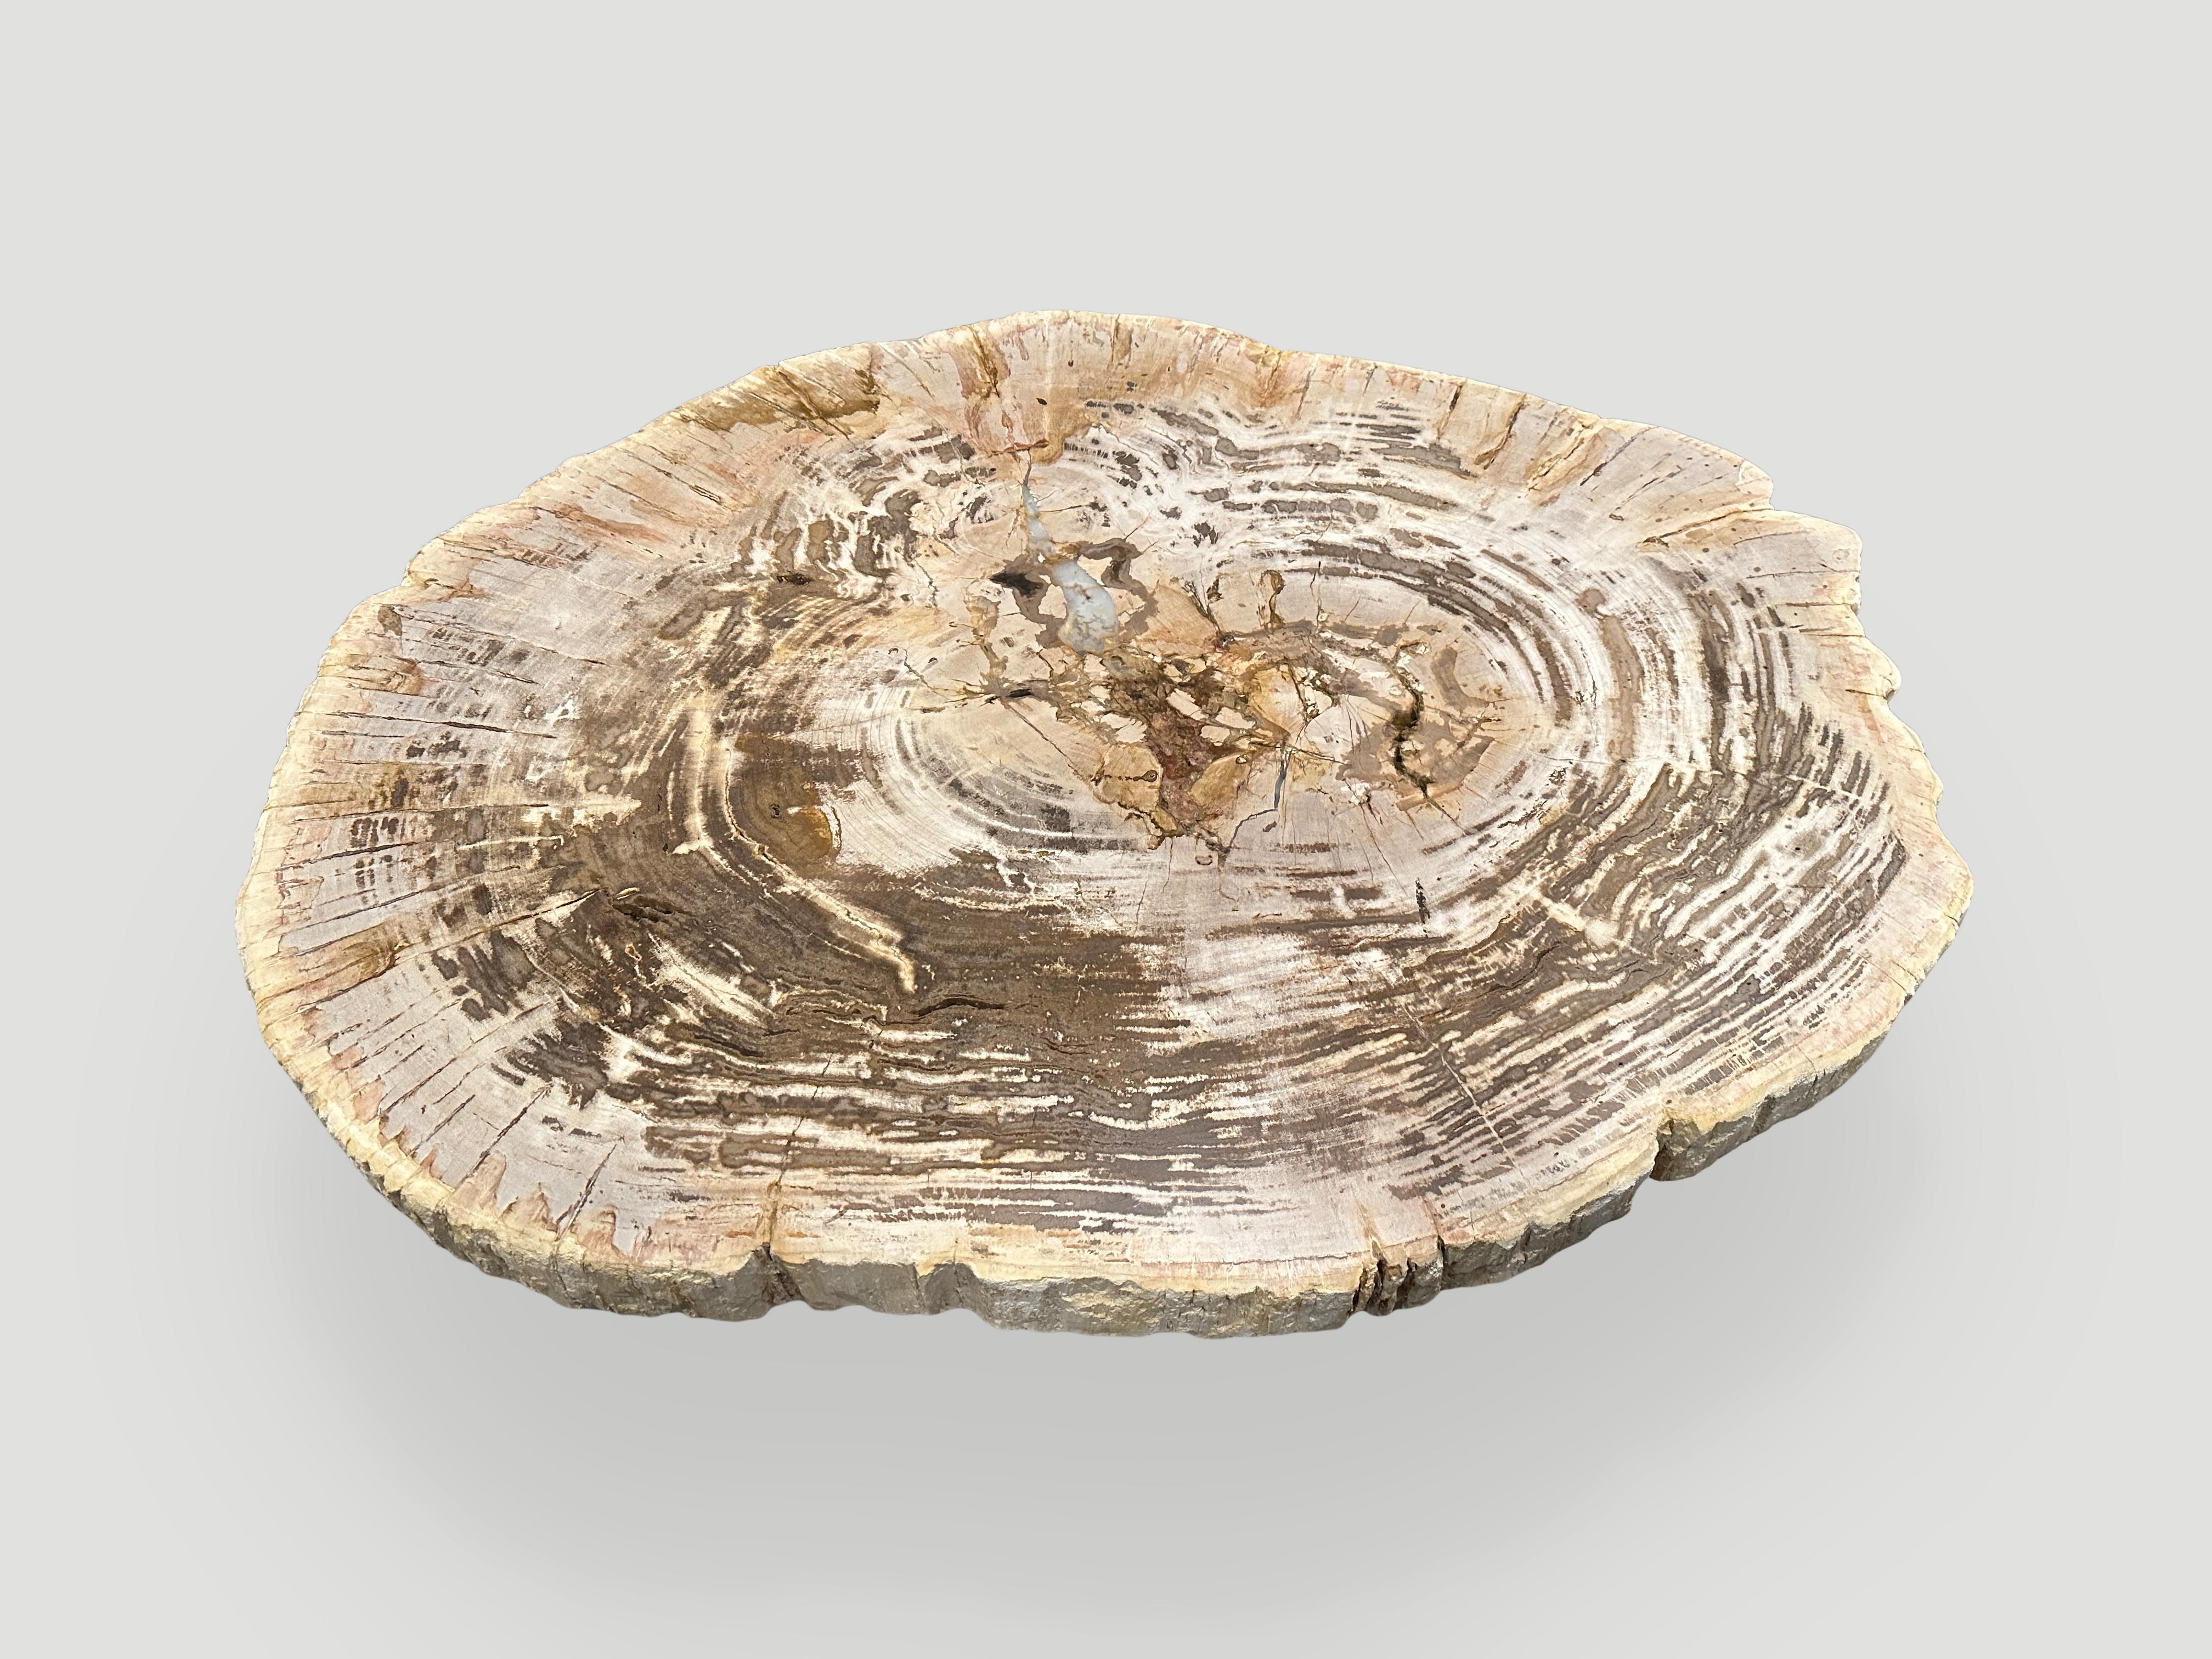 Impressive two inch thick, high quality petrified wood slab coffee table, resting on an organic white washed base. It’s fascinating how Mother Nature produces these stunning 40 million year old petrified teak logs with such contrasting colors and